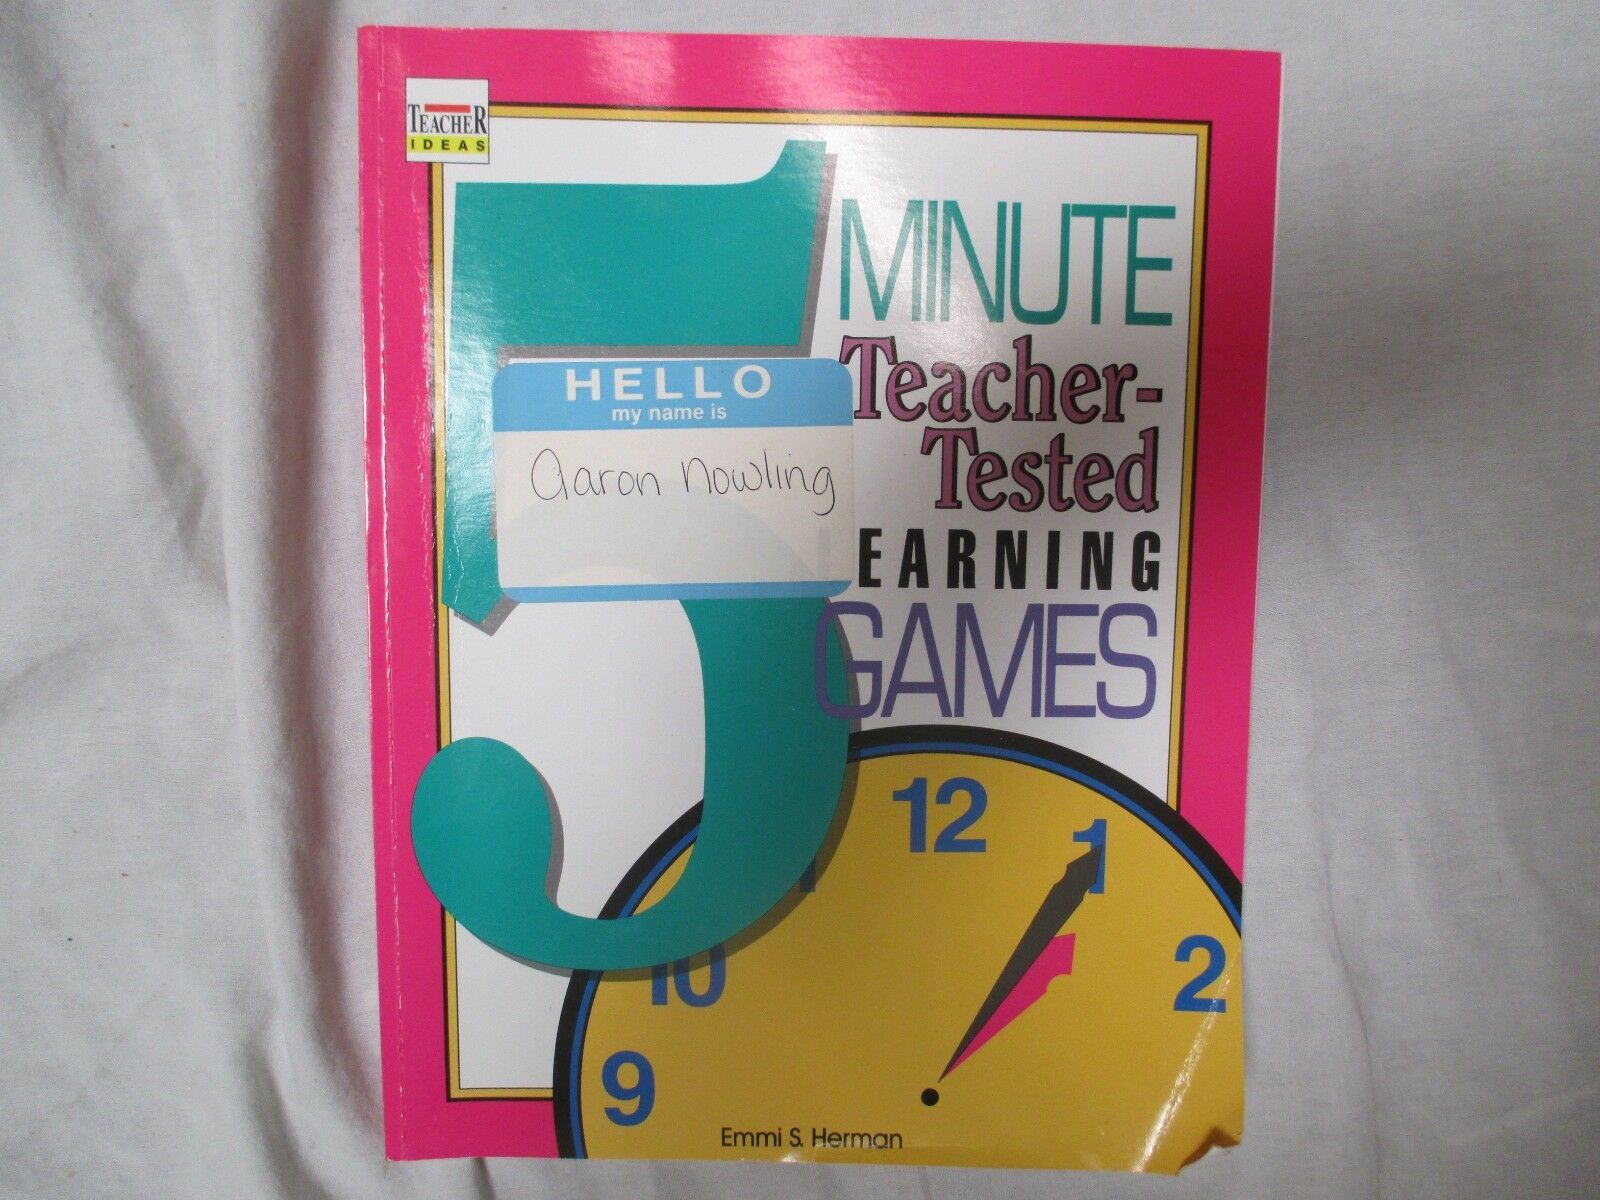 5 MINUTE TEACHER-TESTED LEARNING GAMES